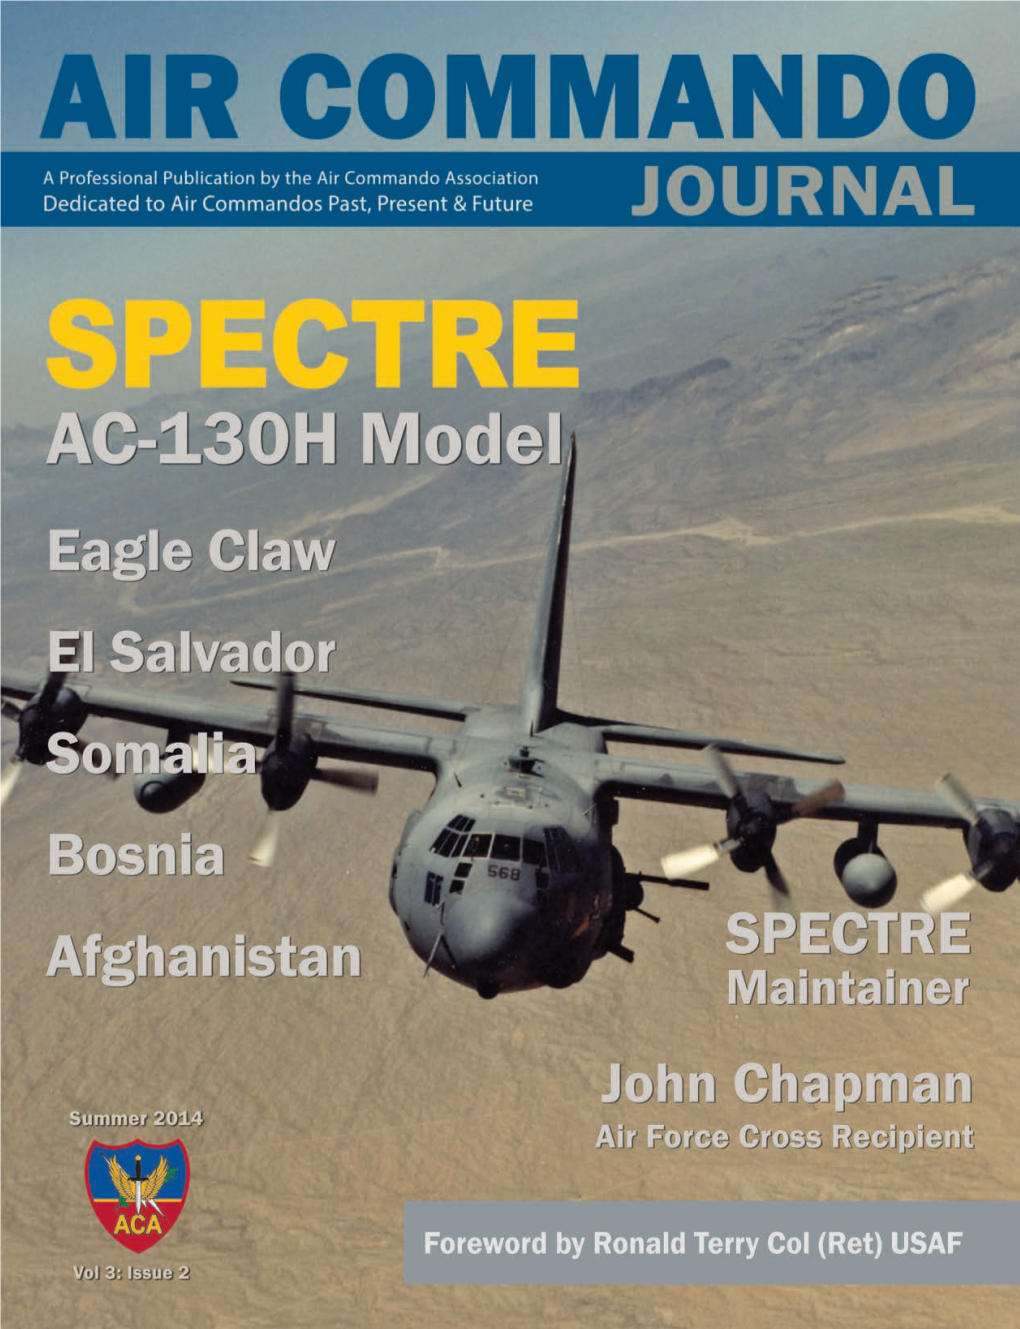 Air Commando JOURNAL Summer 2014 Vol 3, Issue 2 4 Foreword Col (Ret) Ronald Terry 9 AC-130S in Operation Rice